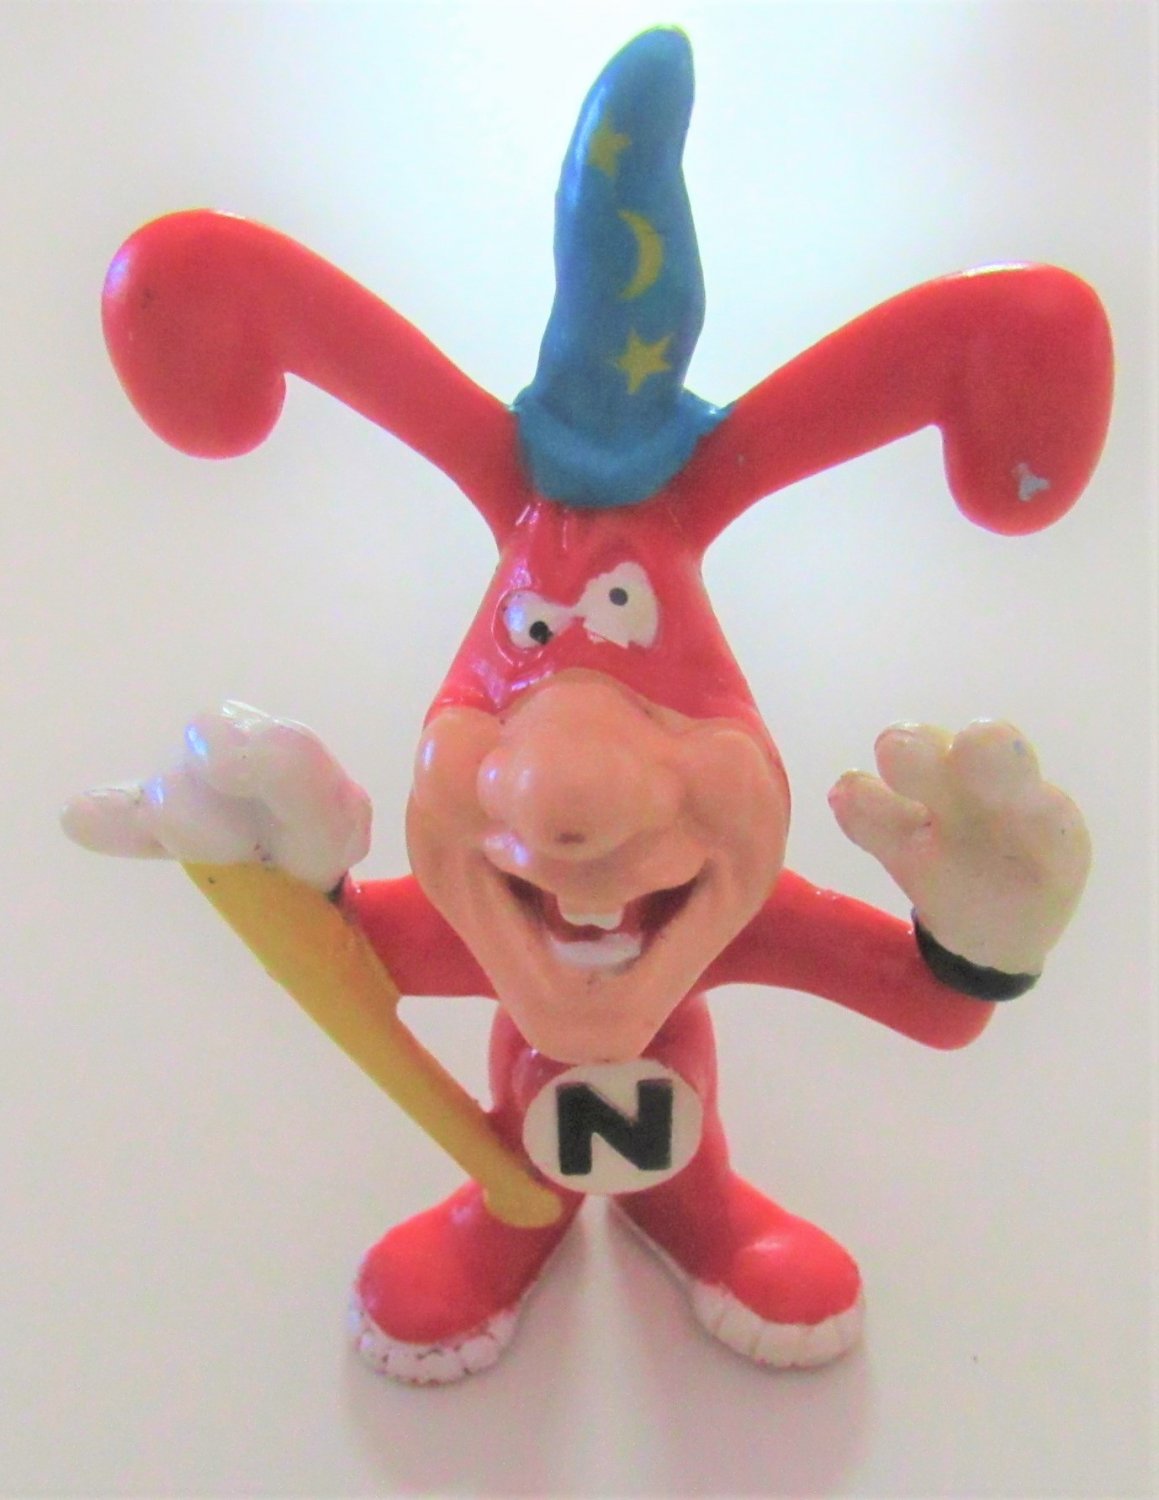 3 NOID Domino's Advertising Figures ~ All Mint In Package NOS Claymation 1988 